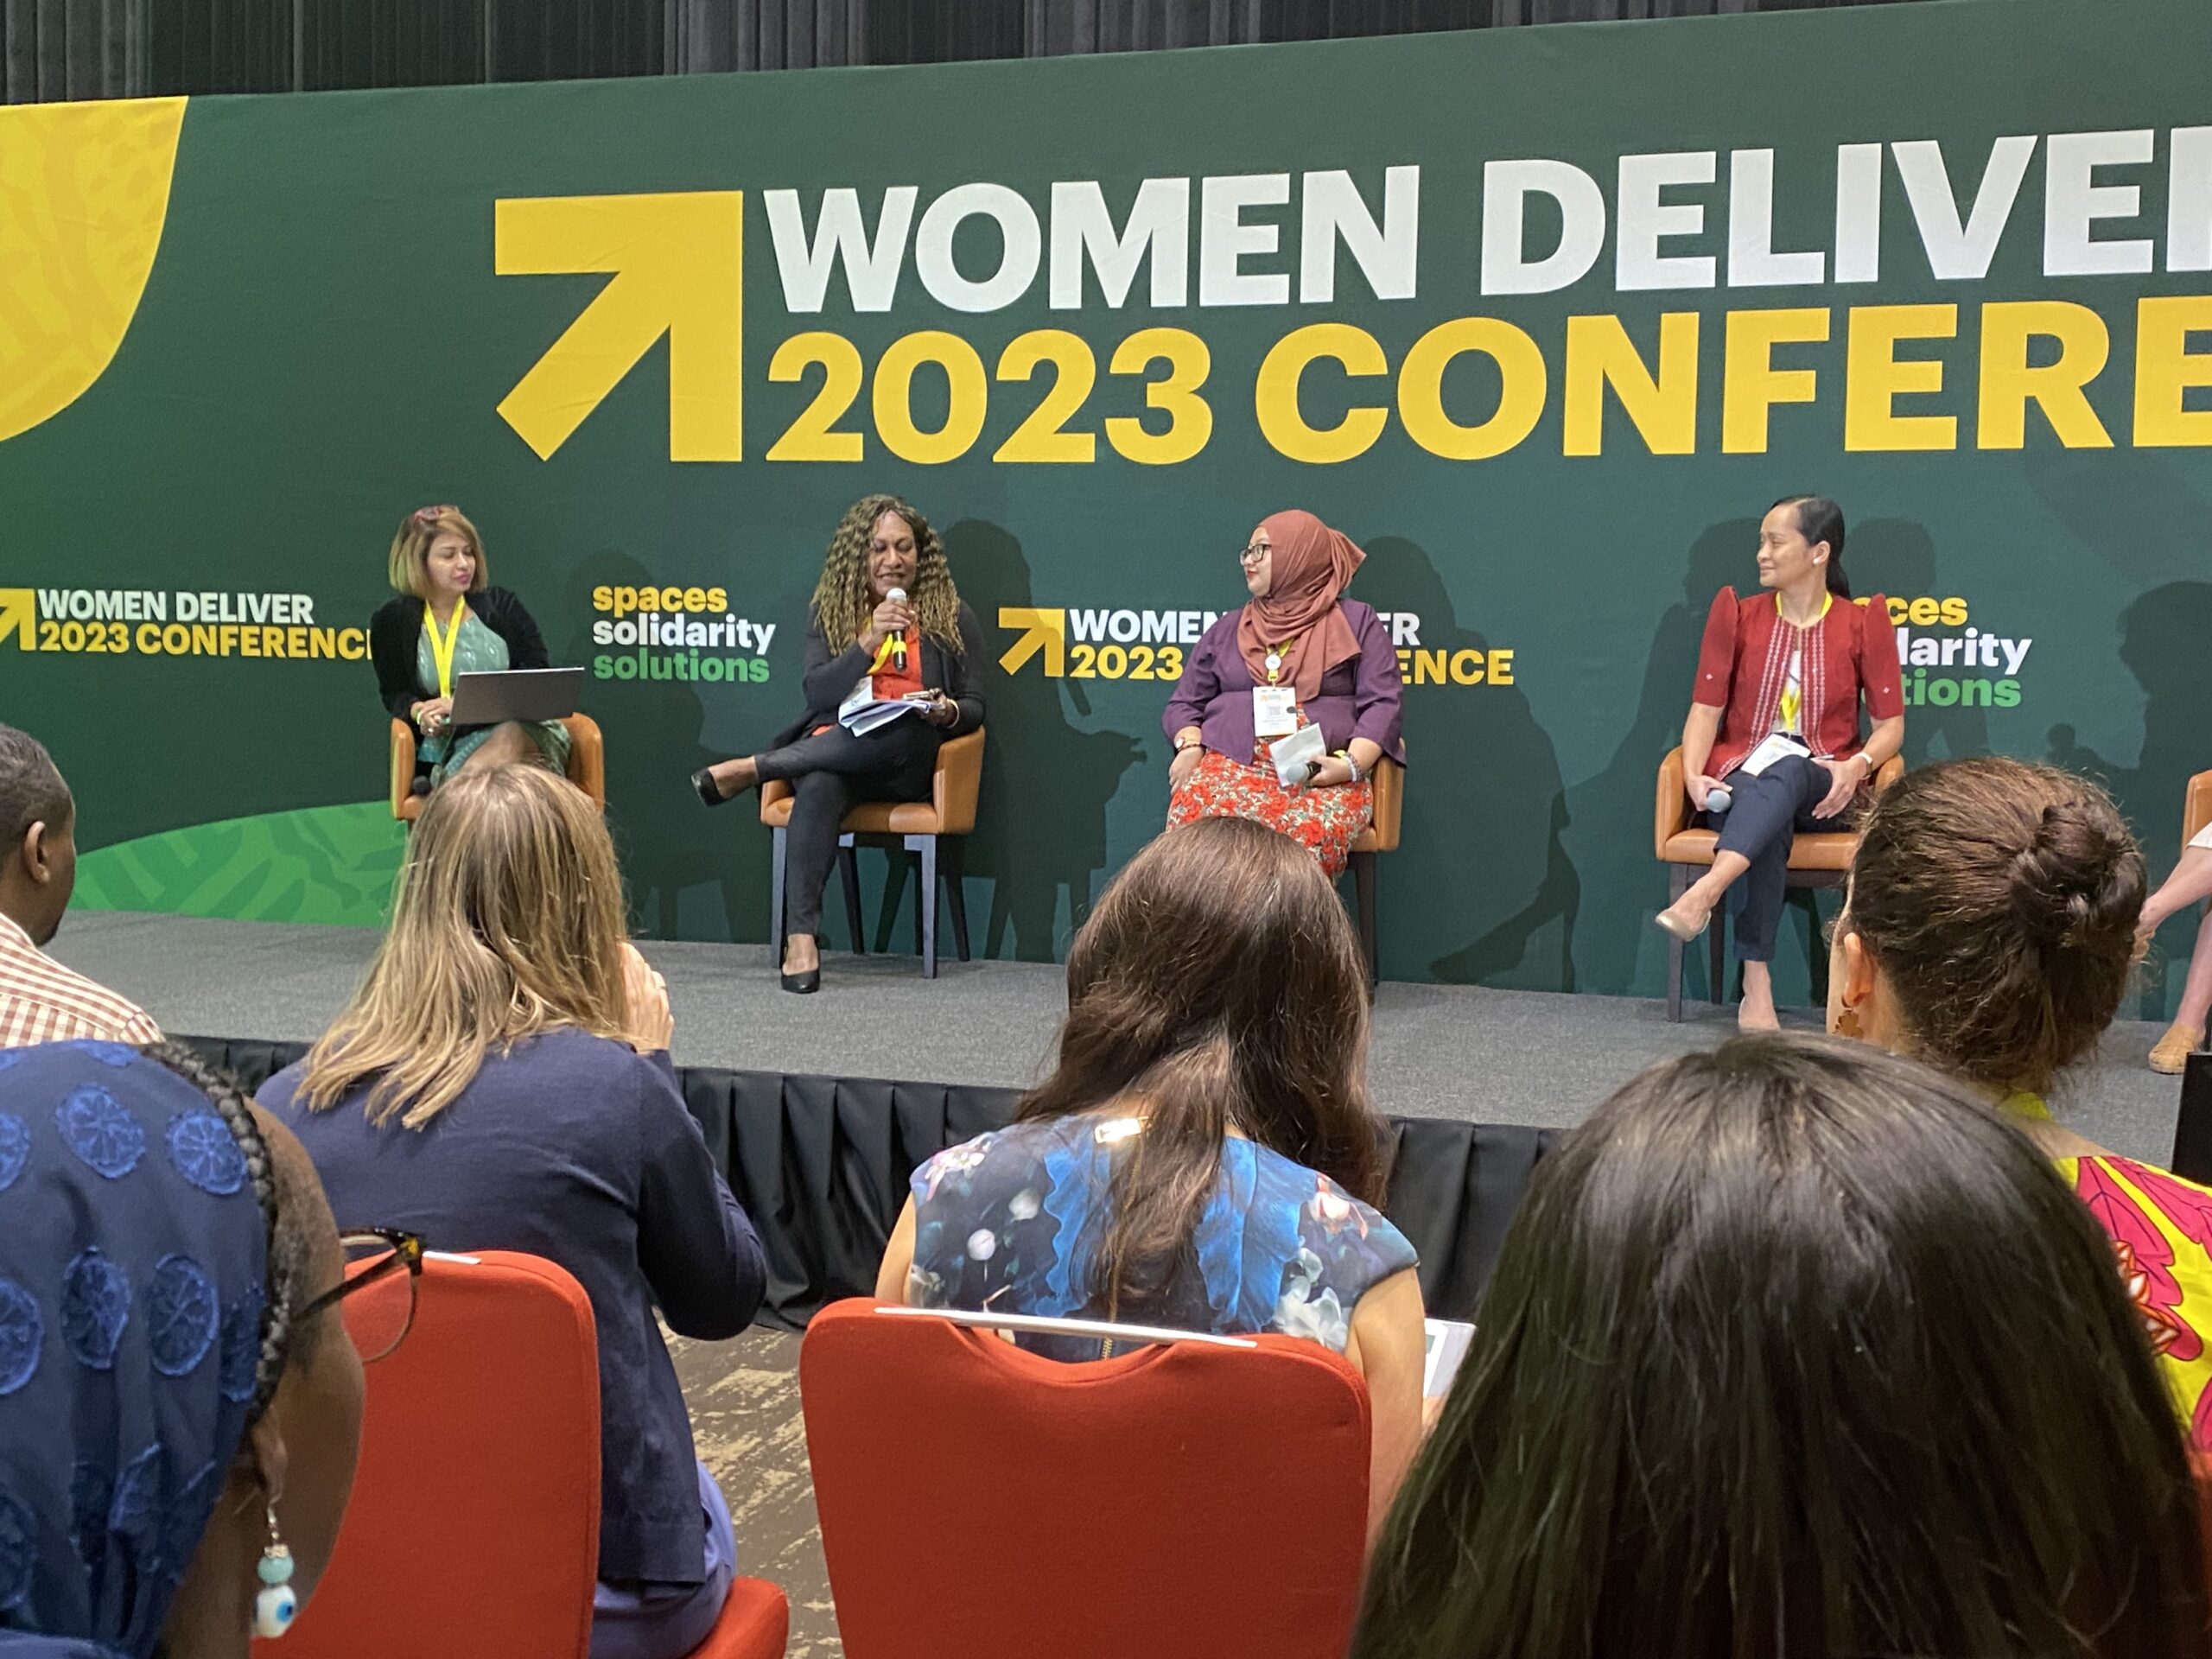 MSI Asia Pacific at Women Deliver